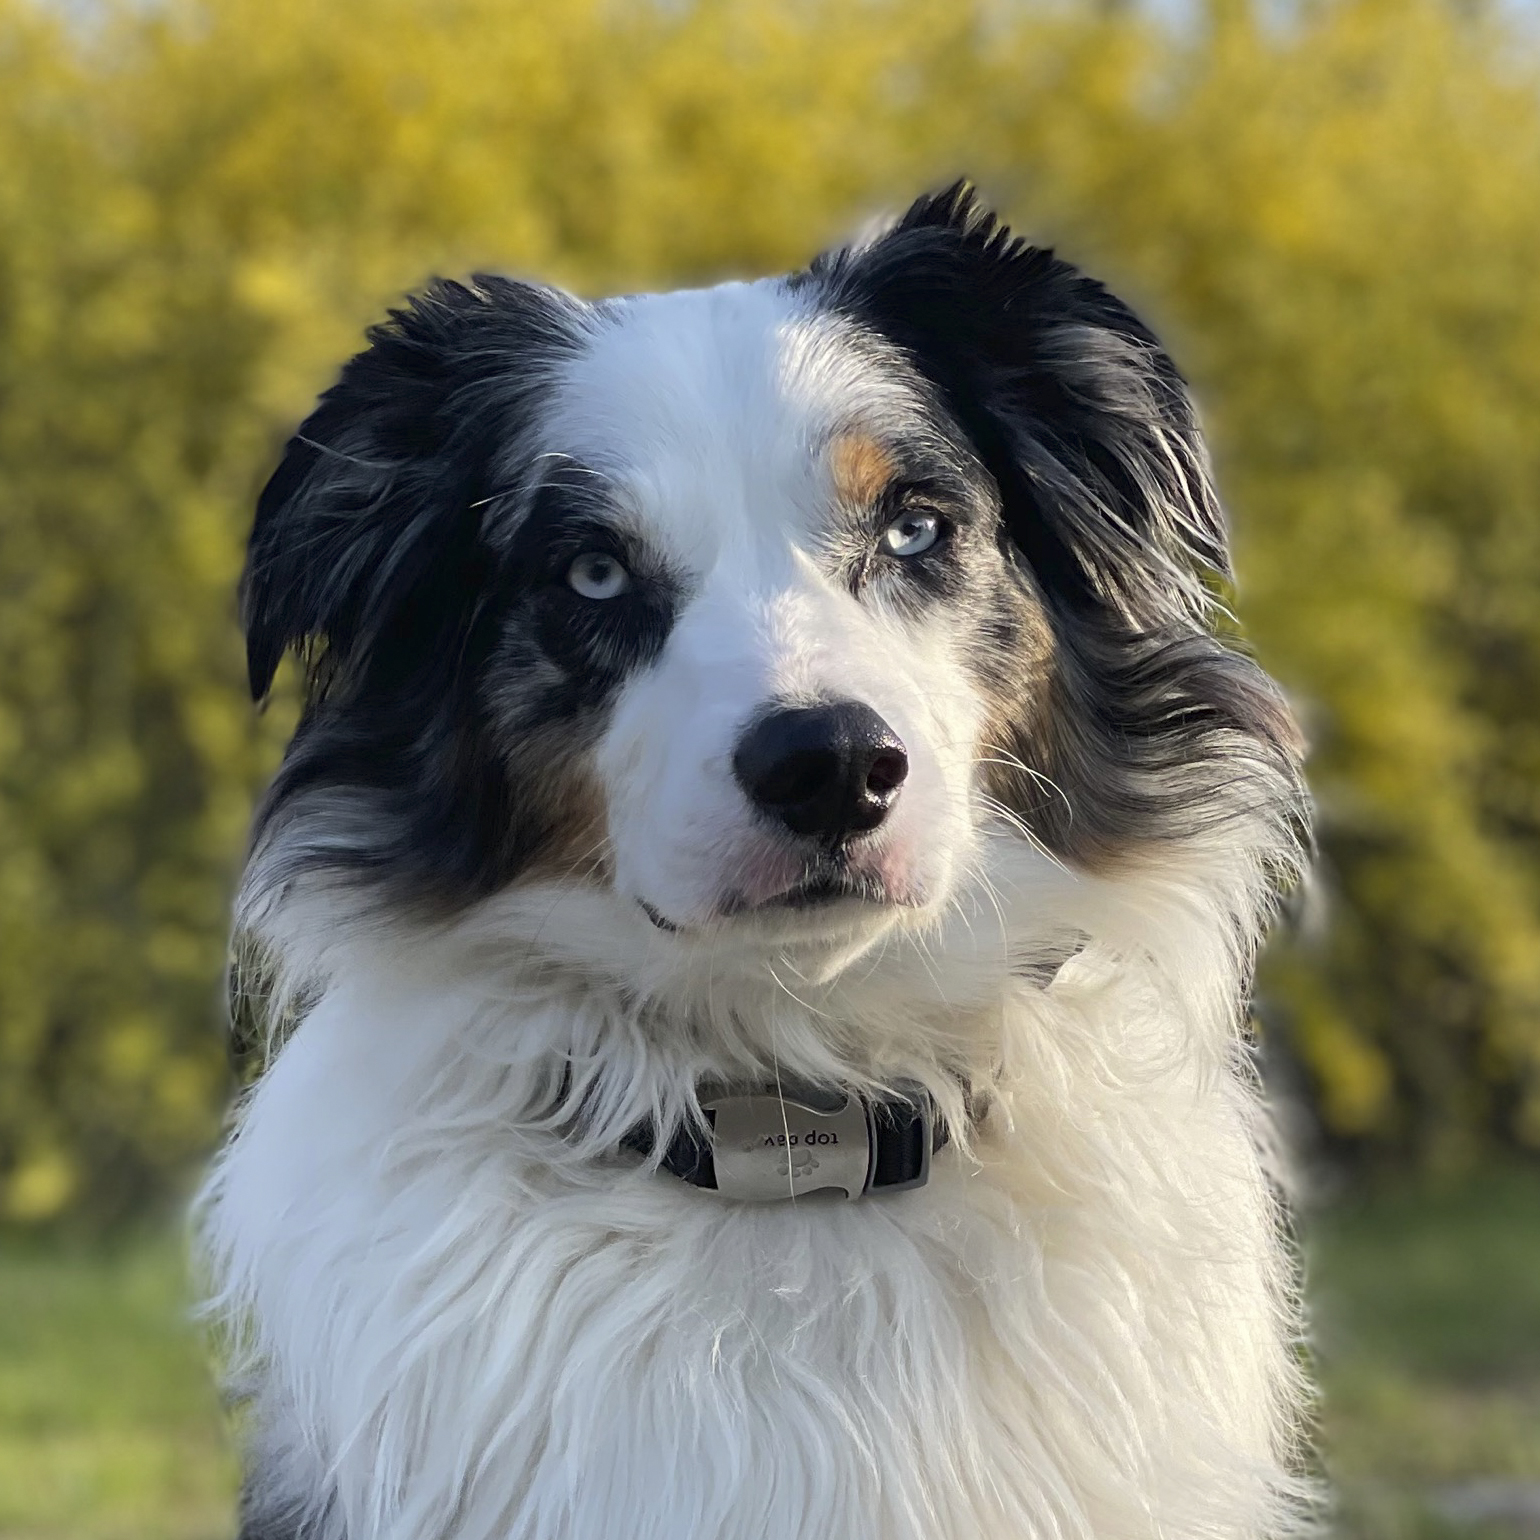 a black and white dog is looking at the camera